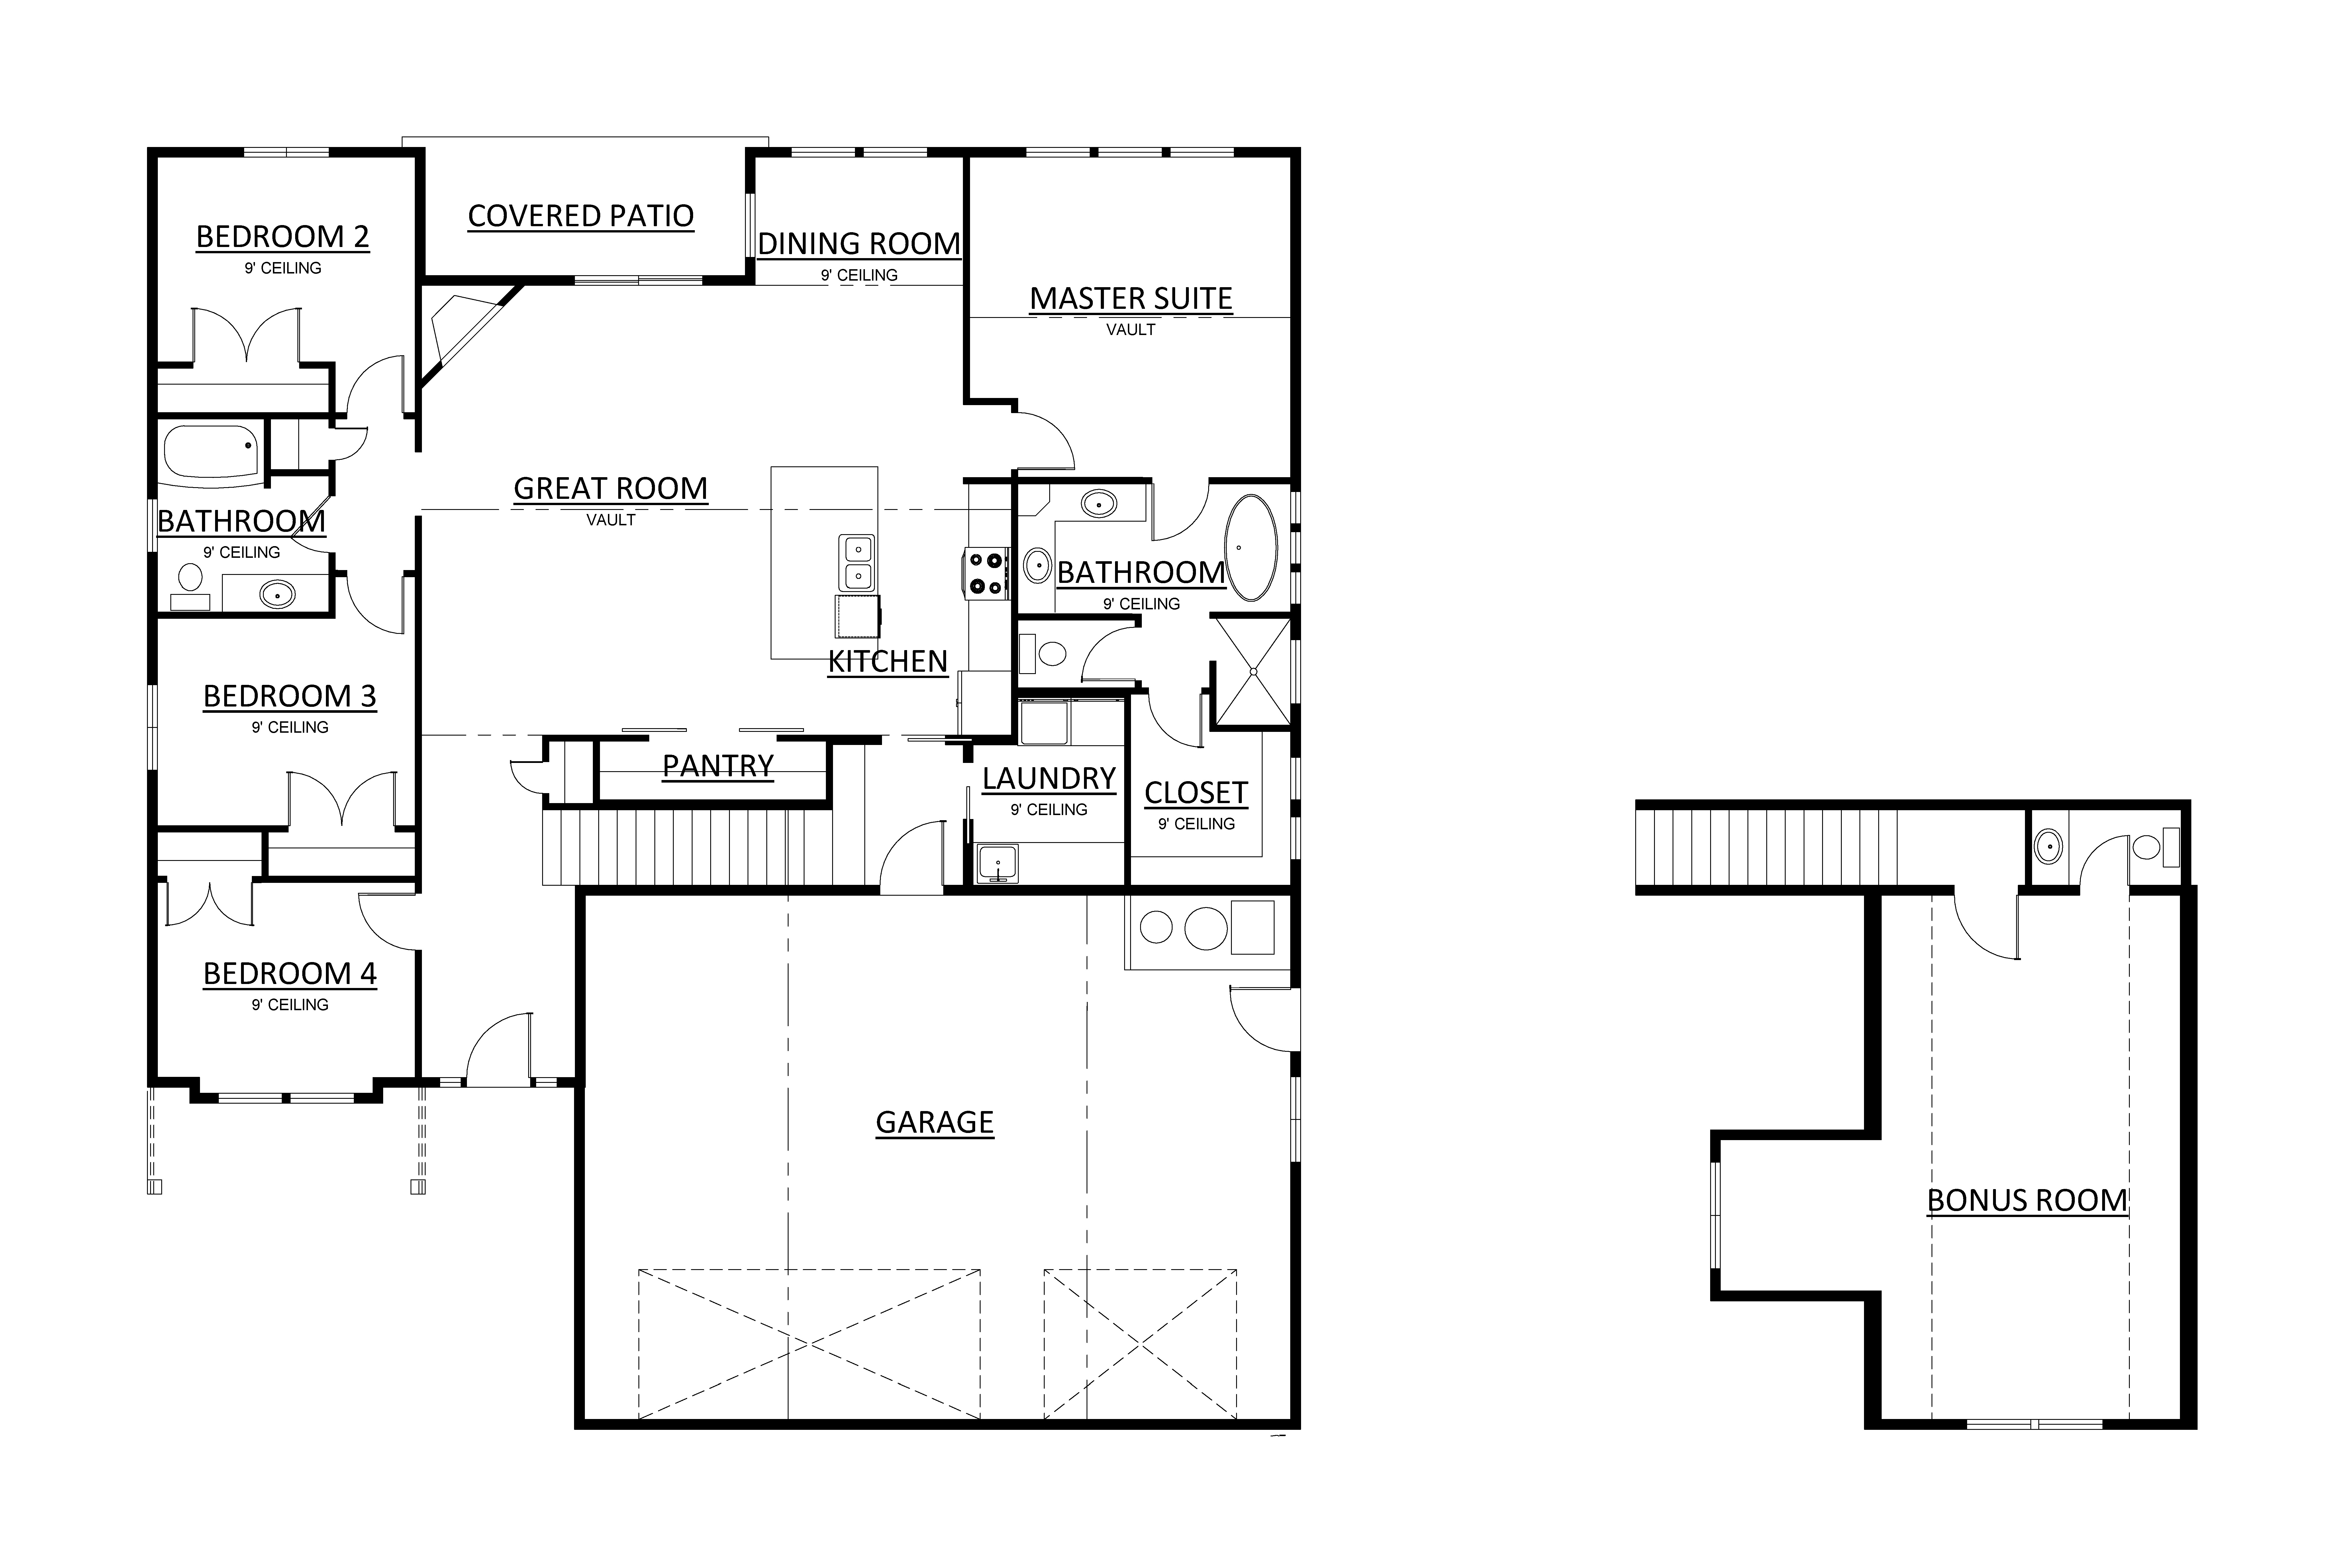 A detailed floor plan on the eaves.